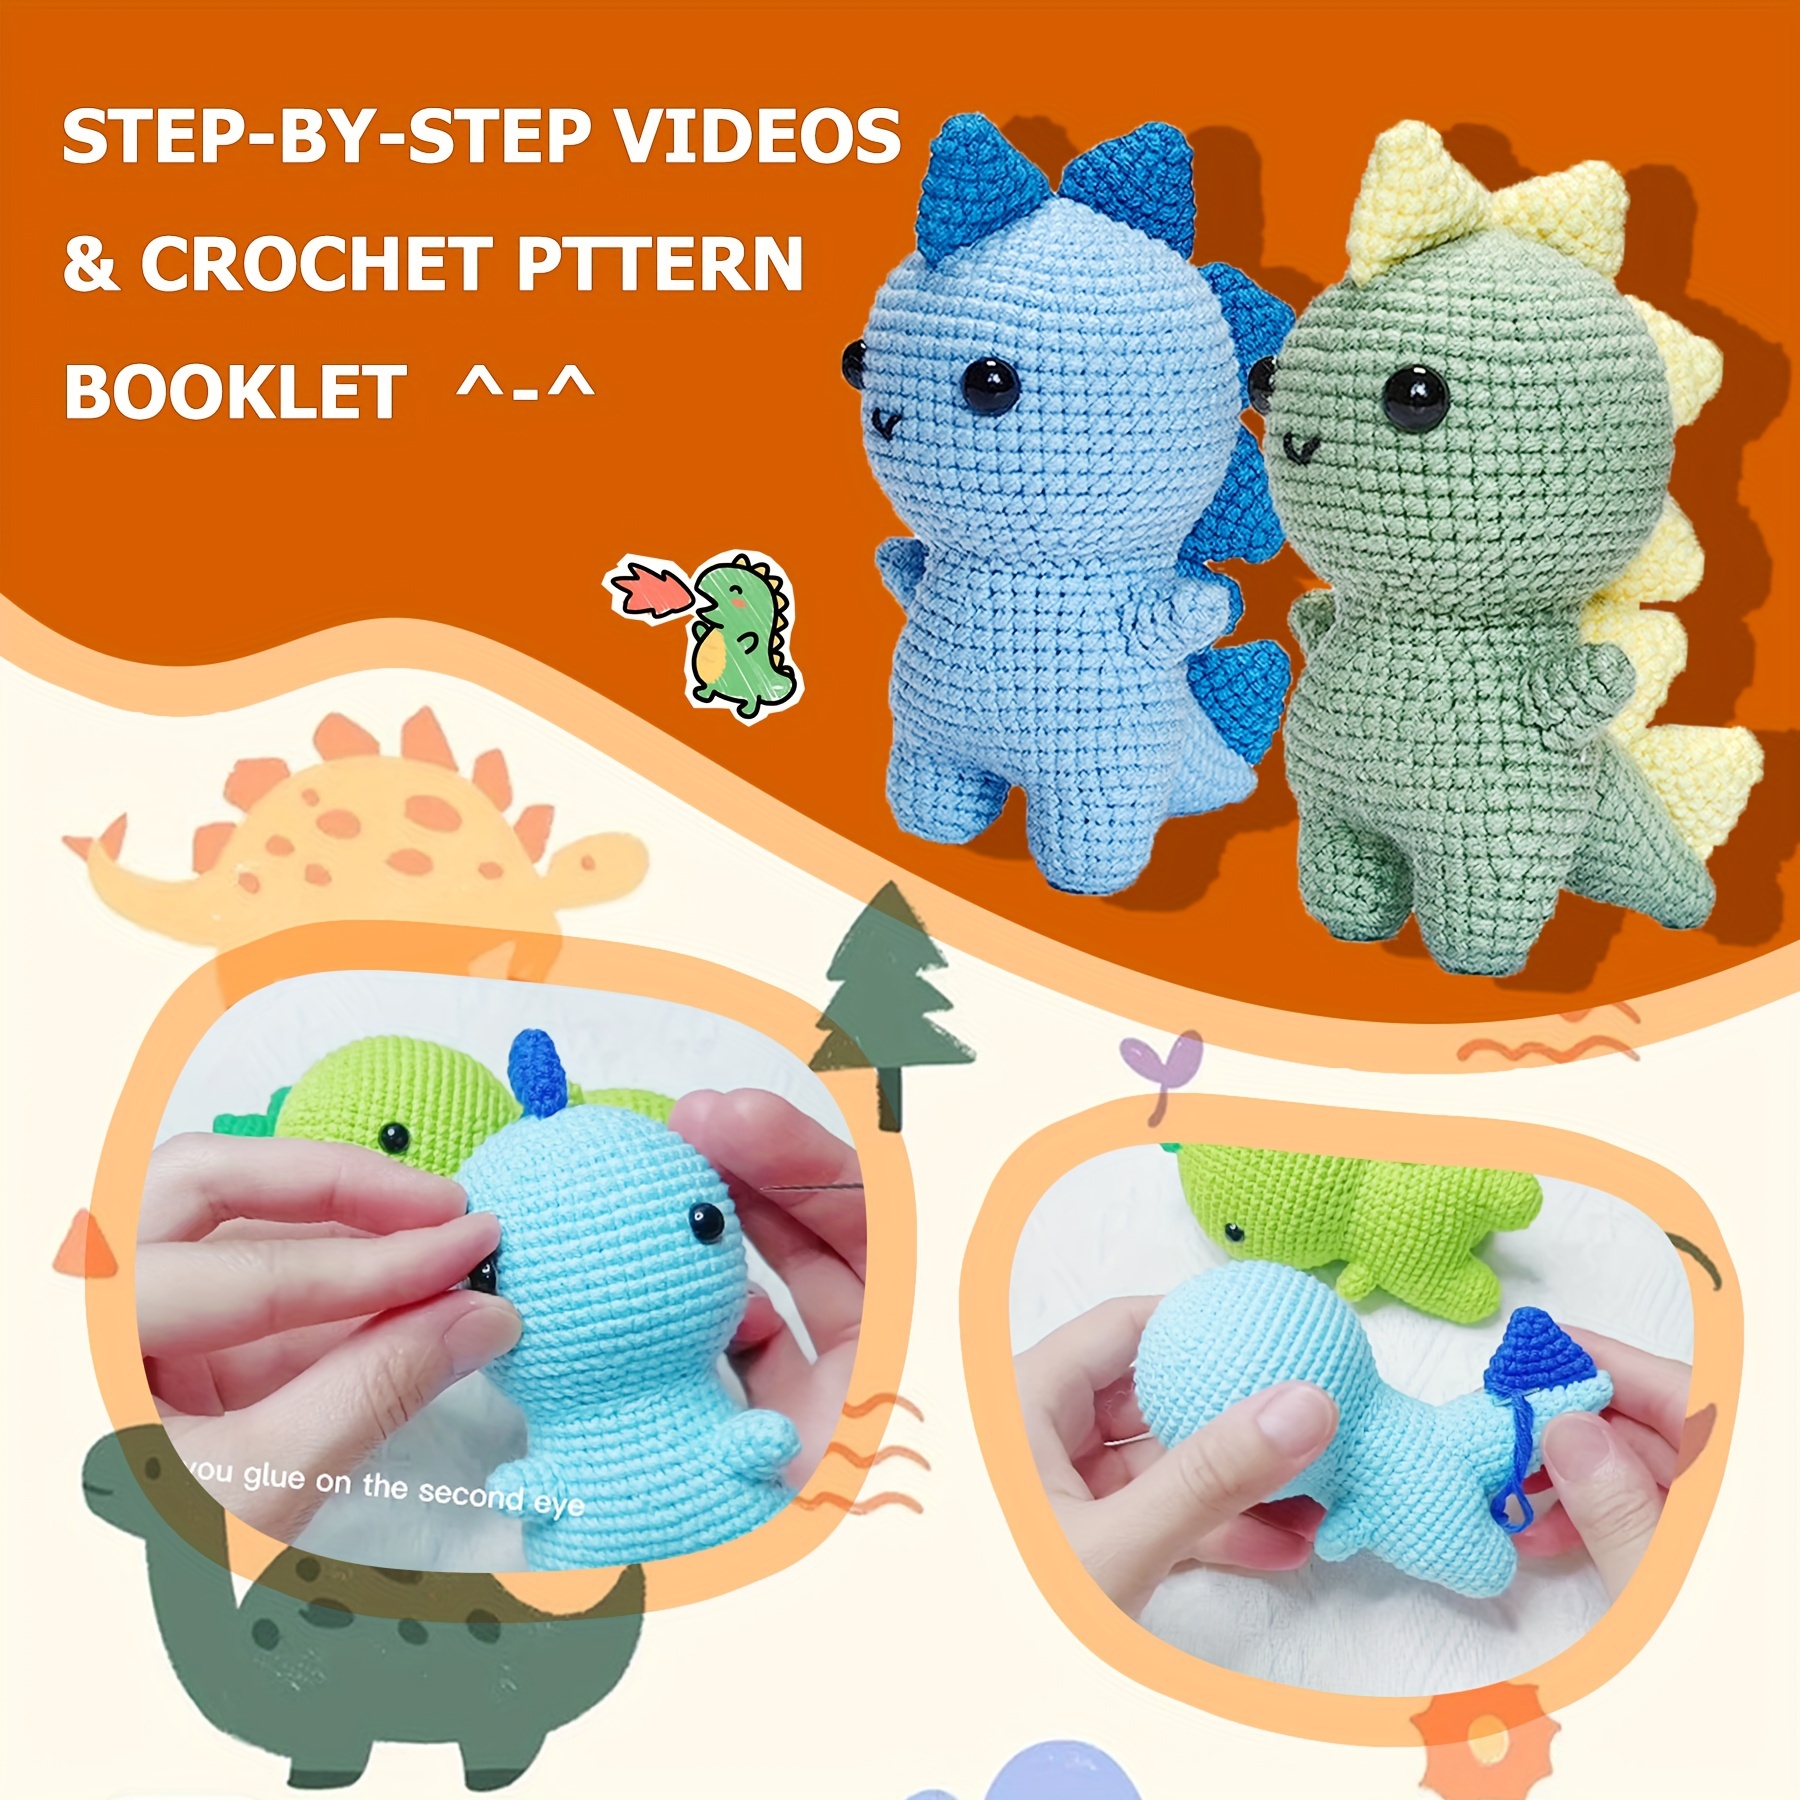 TWISBAY Crochet Kit for Beginners with Crochet Yarn - Triceratops Dinosaur  Amigurumi Crochet Kit with Step-by-Step Video Tutorials for Adults and Kids